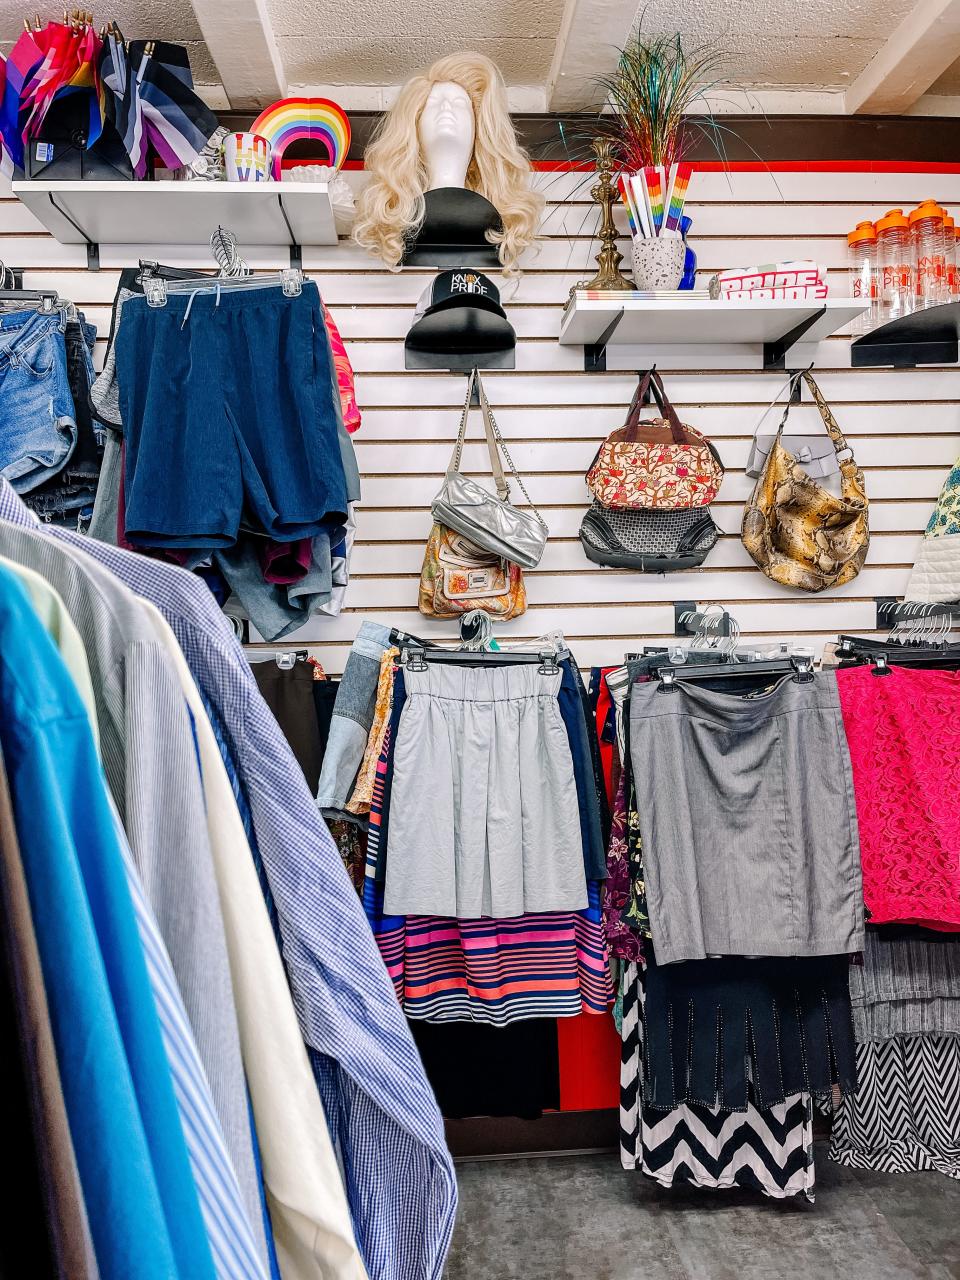 The Thriftique inside the Knox Pride Community Resource Center stocks a range of clothing and accessories for just $5 apiece, or free for those in need. South Knoxville, May 23, 2023.